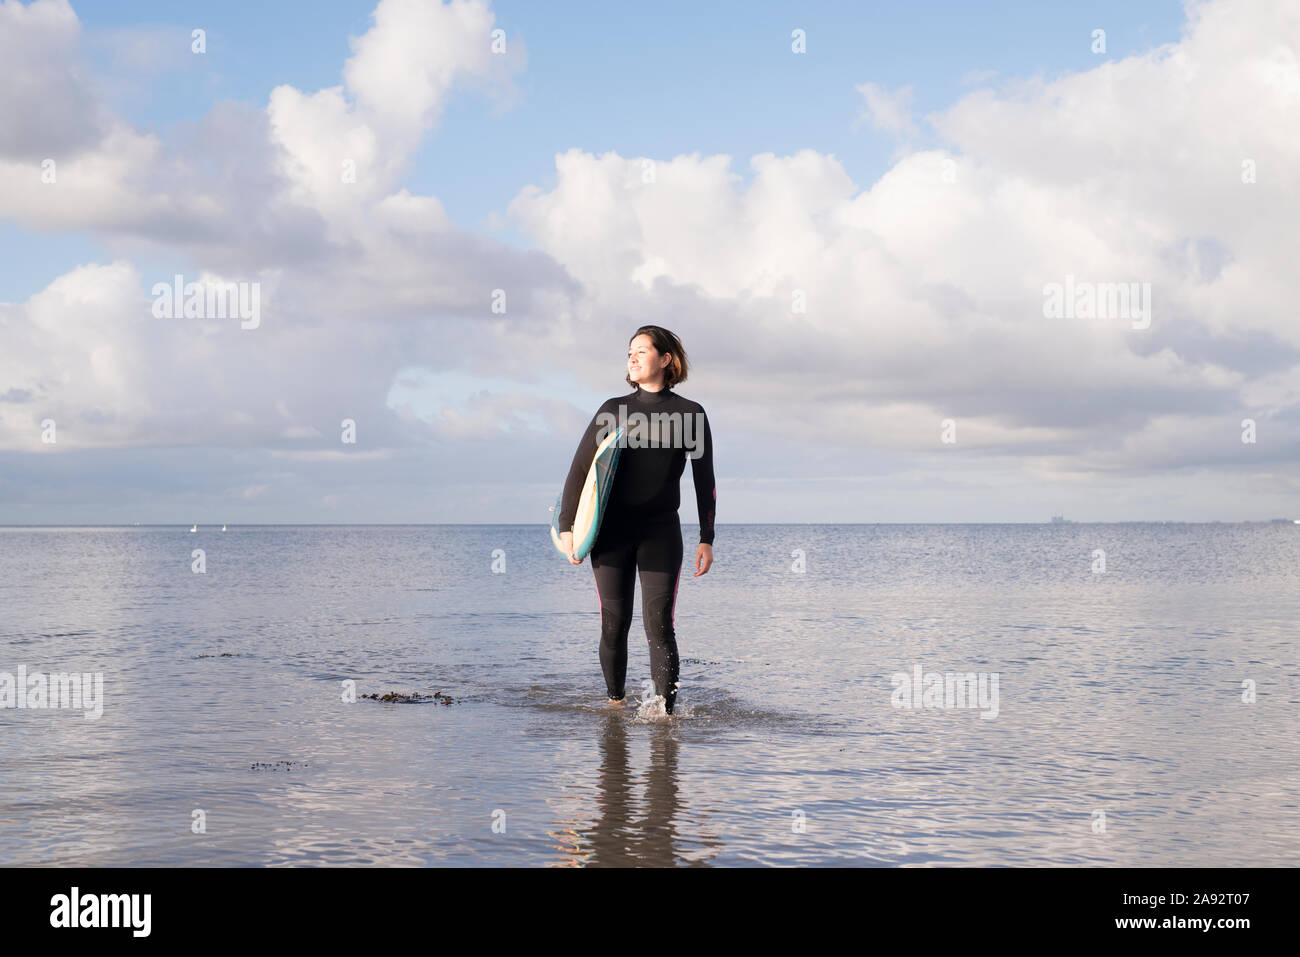 Female surfer with surfboard Stock Photo